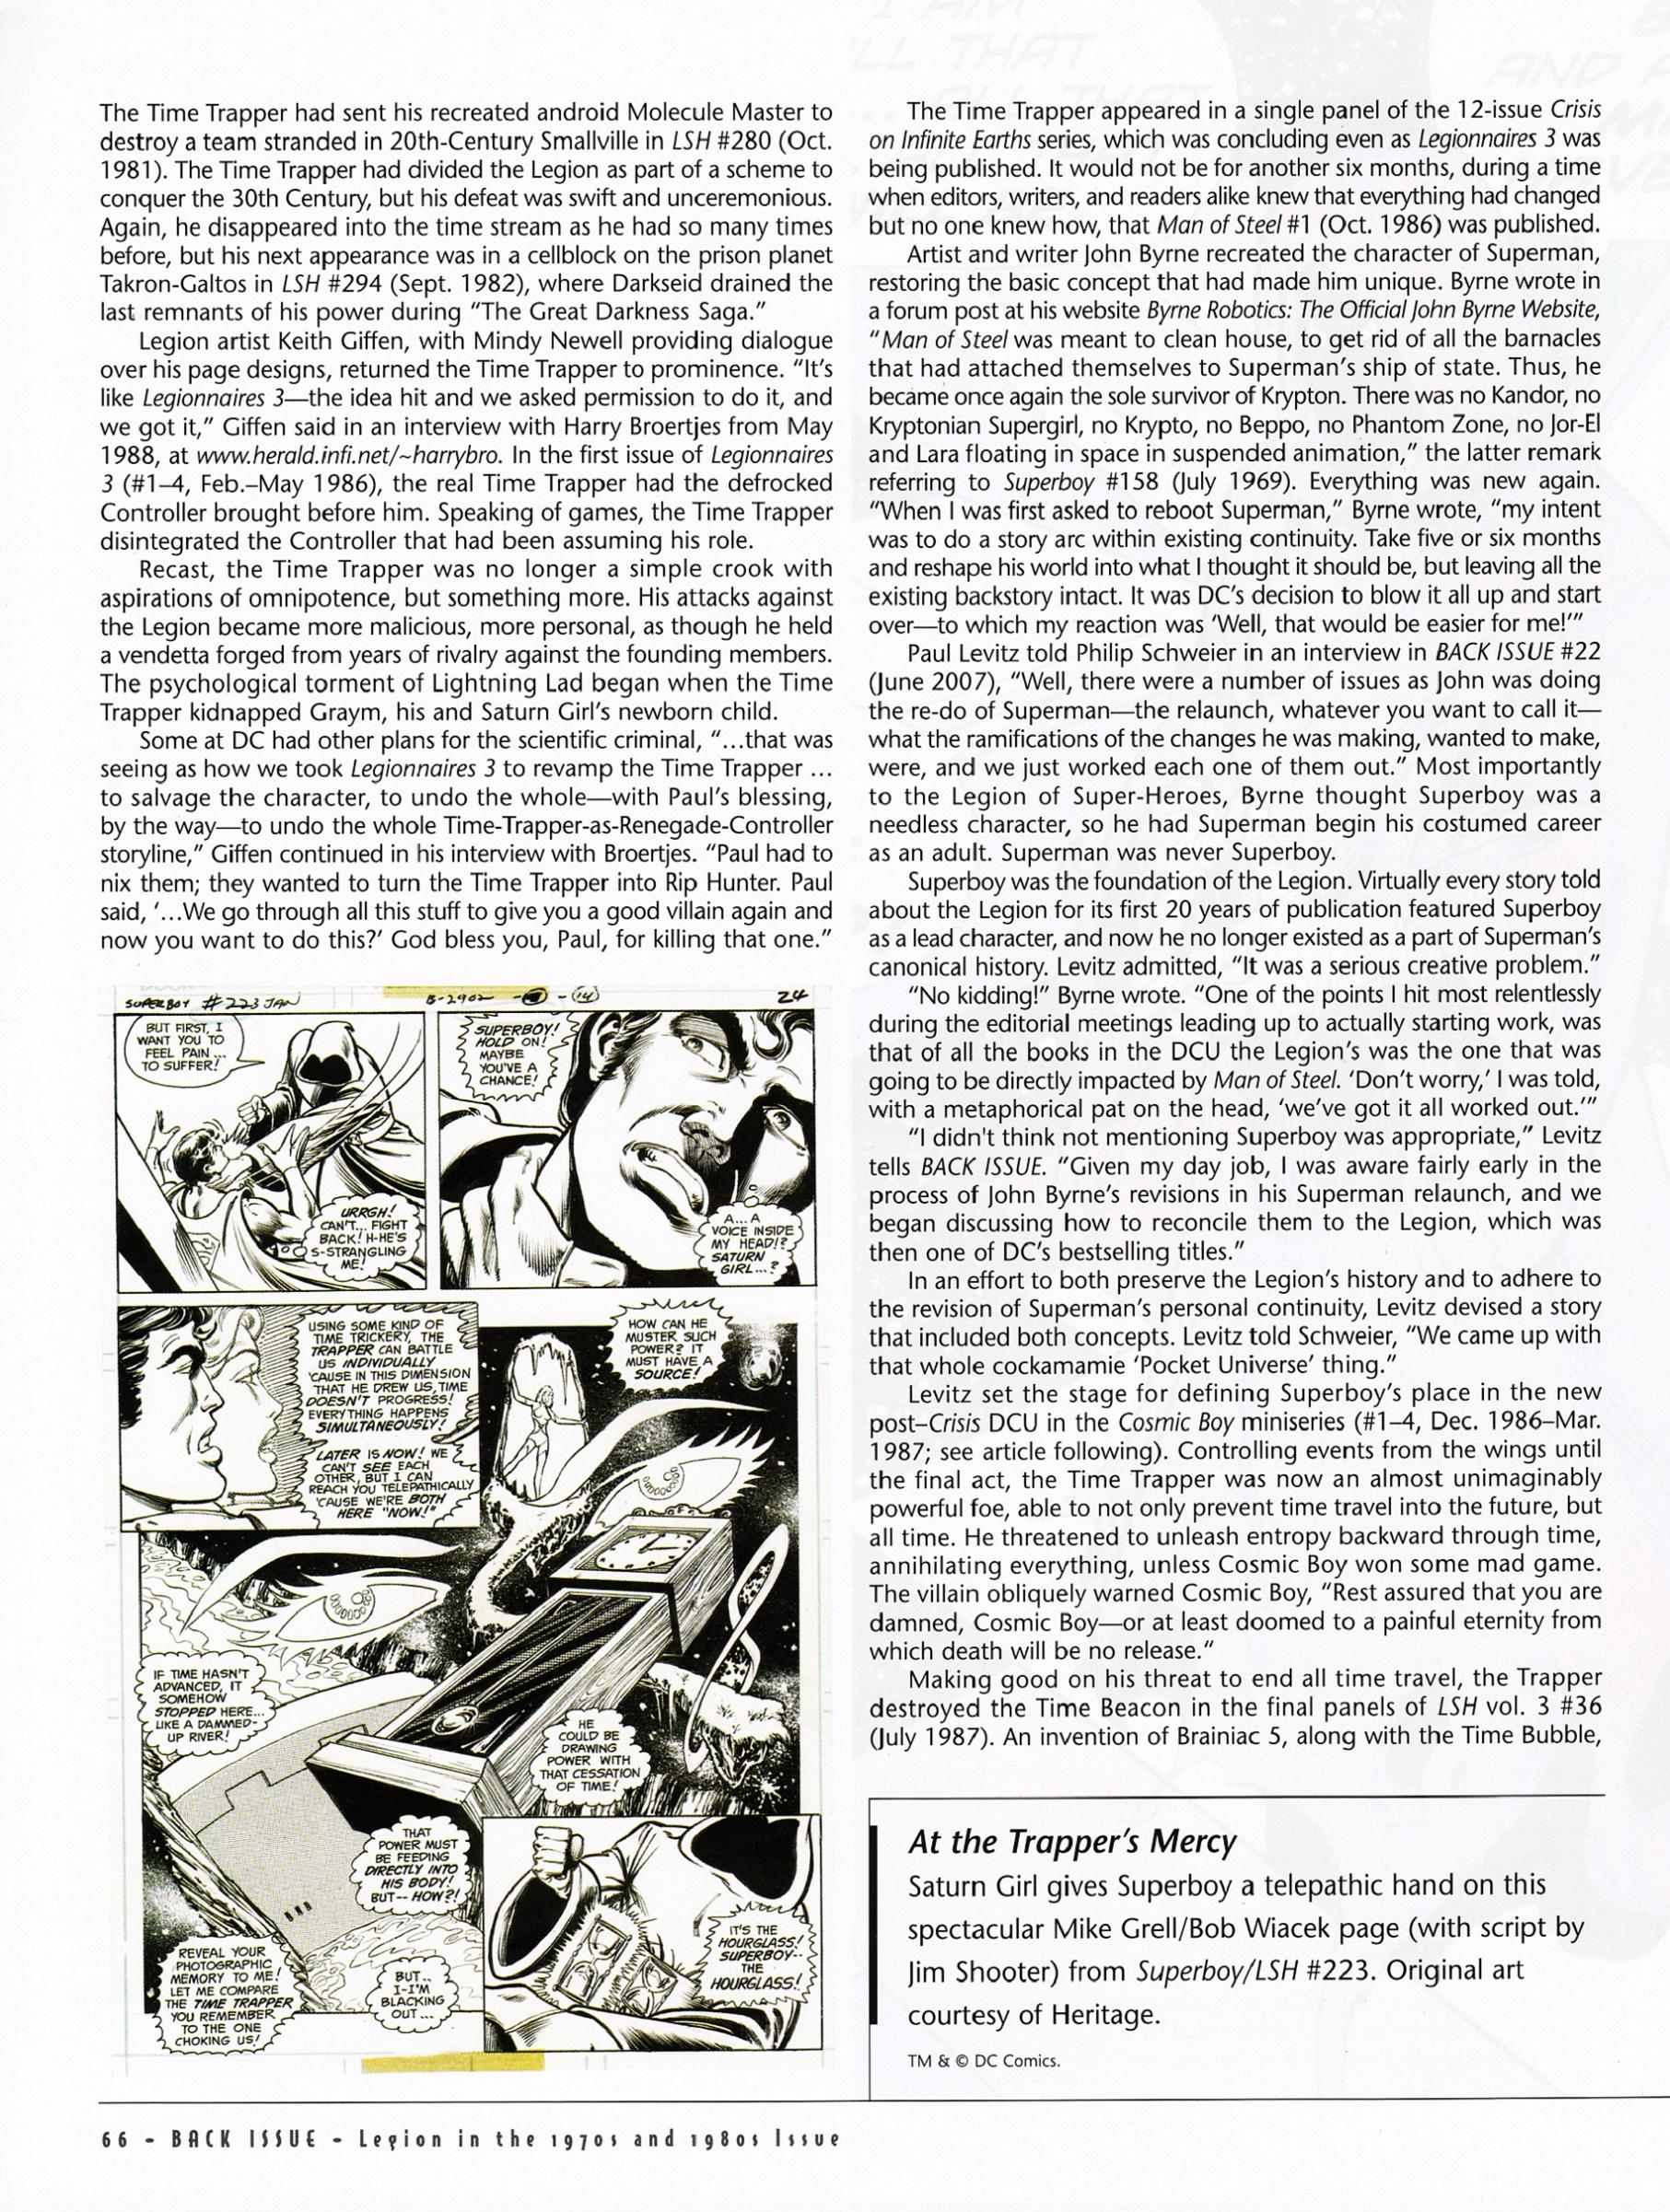 Read online Back Issue comic -  Issue #68 - 68